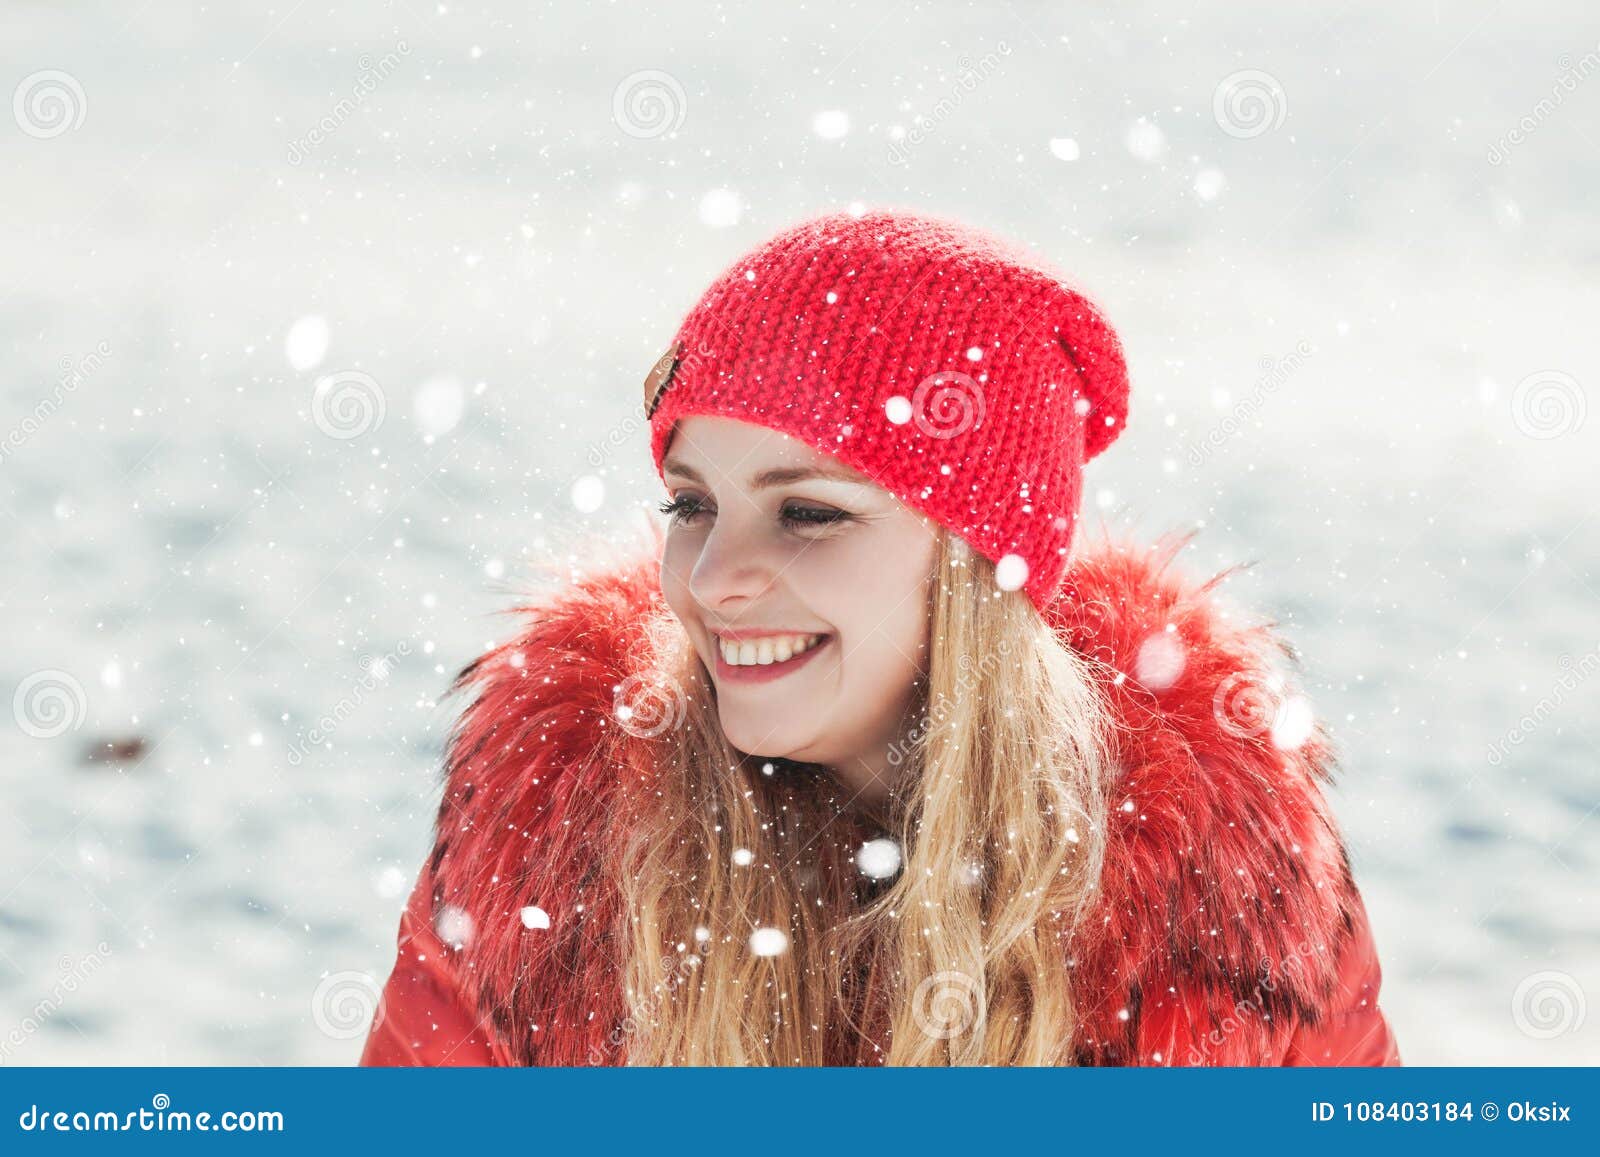 Girl in red parka stock photo. Image of background, flakes - 108403184